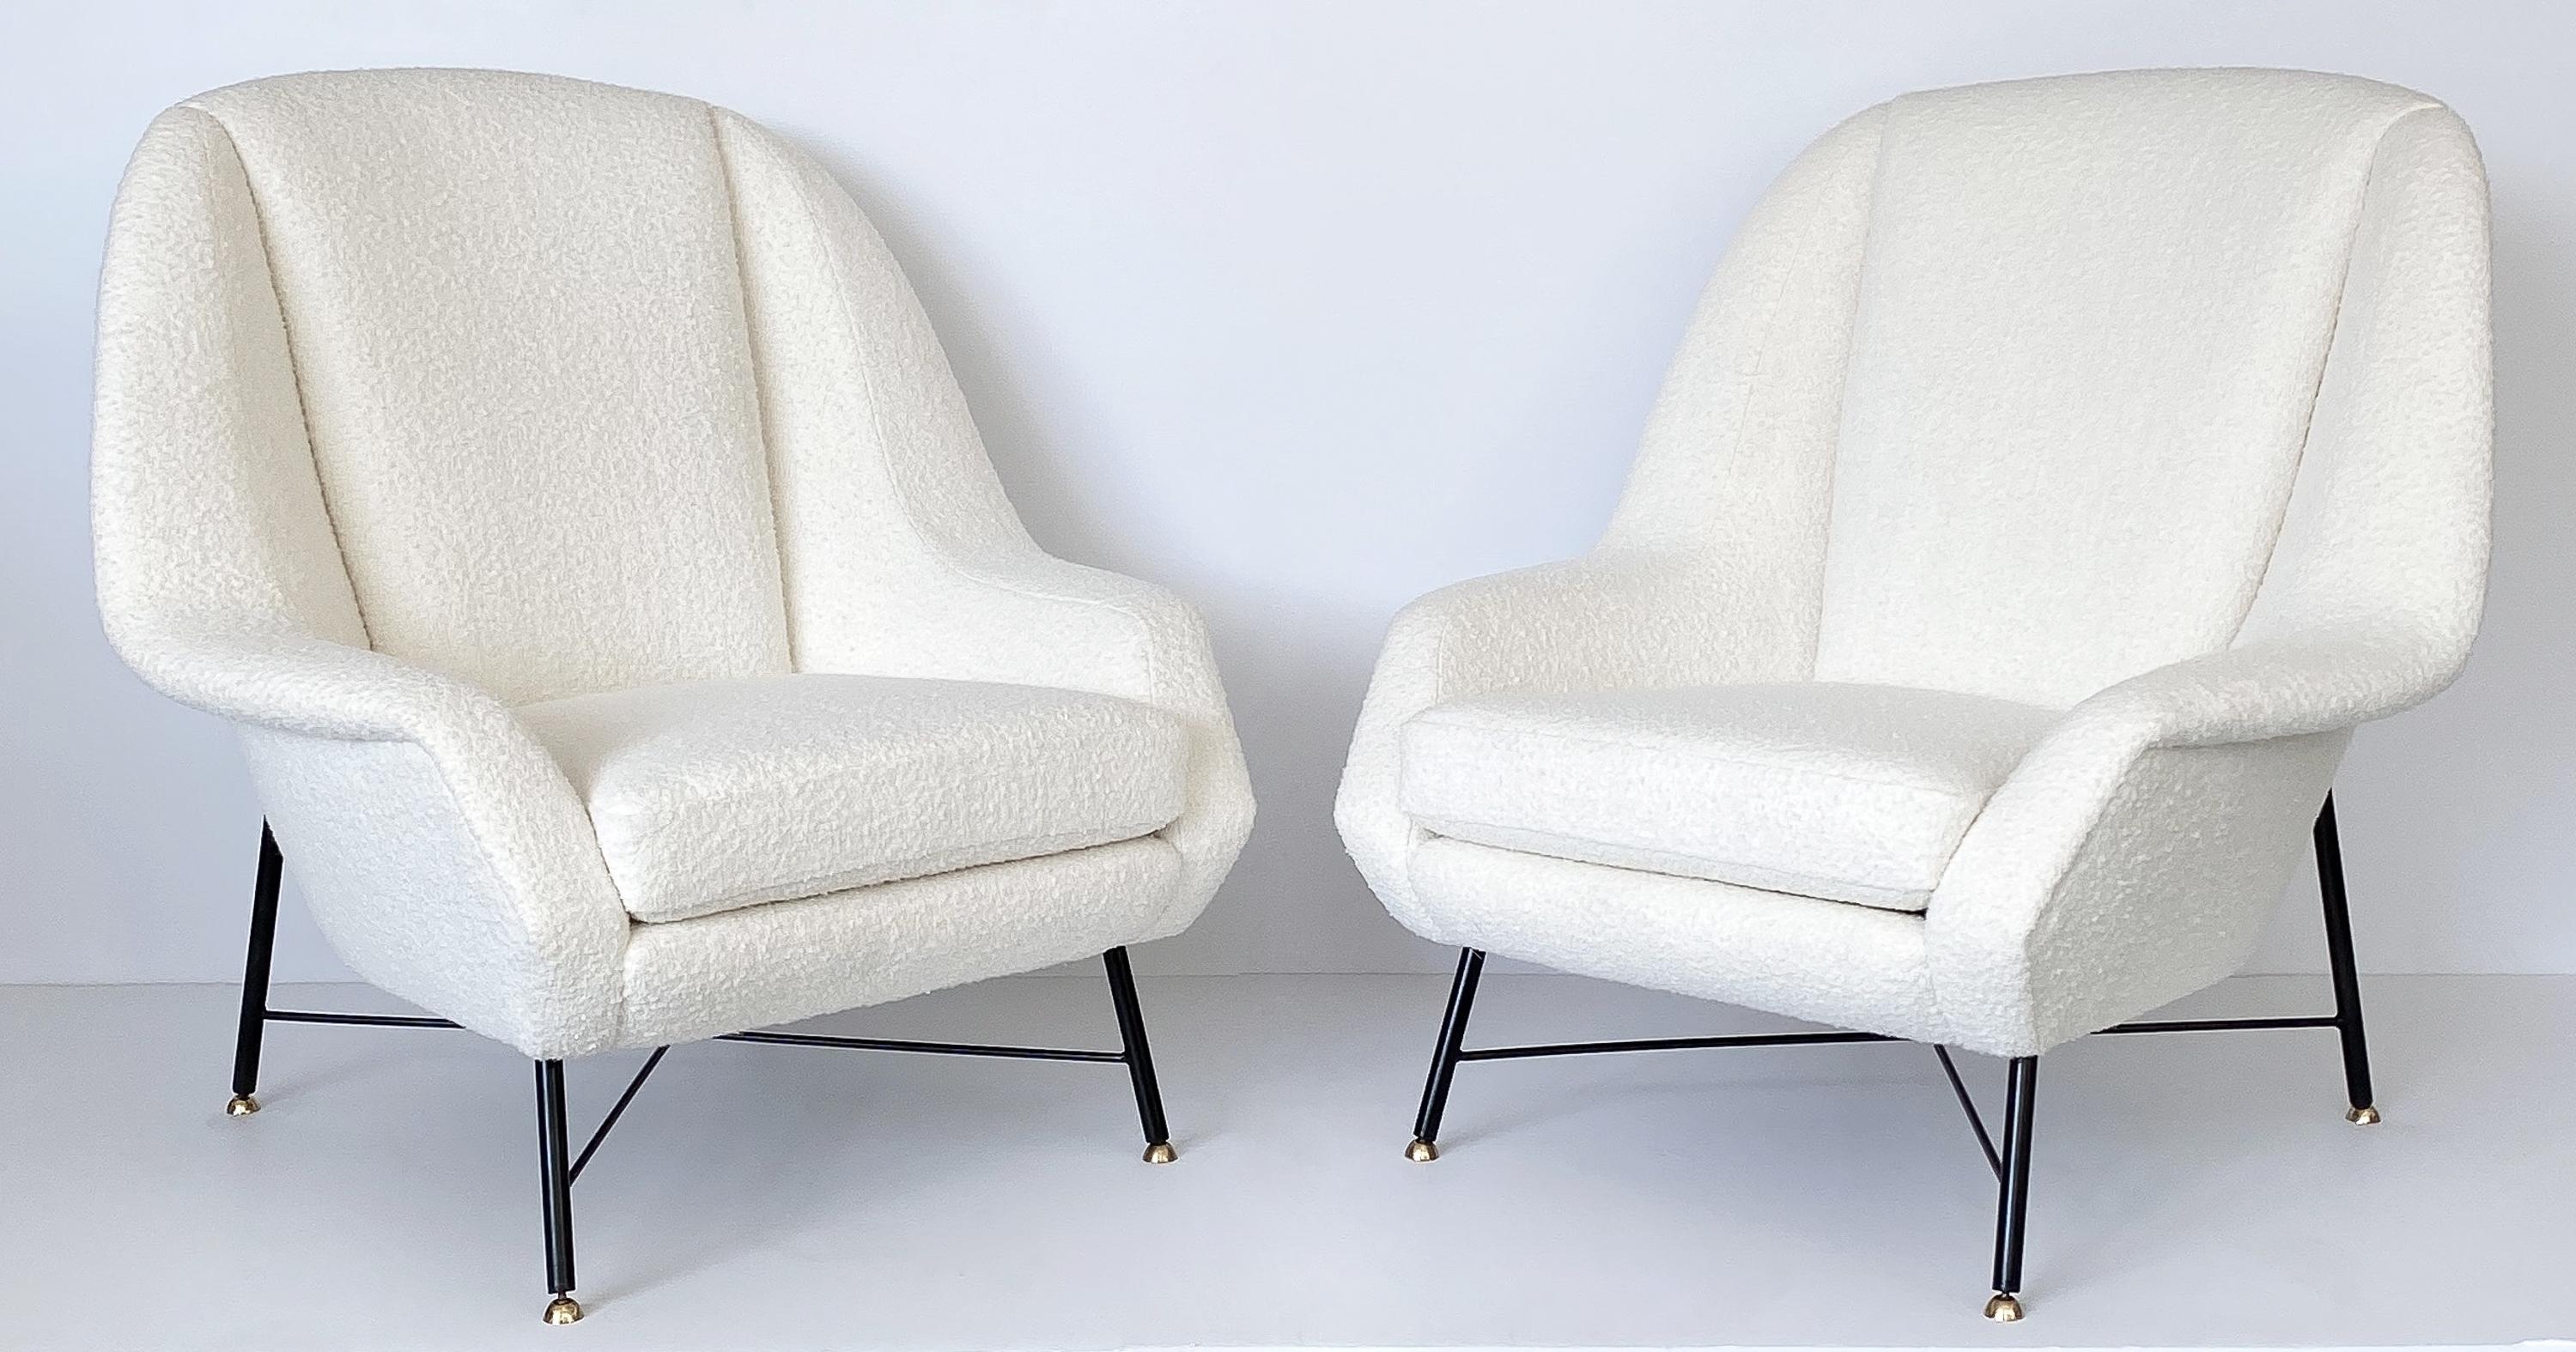 An incredible stunning pair of Italian lounge chairs by ISA Bergamo, circa 1950s. Newly upholstered in a warm white heavily textured Italian wool bouclé. New foam throughout. Tight upholstered back with loose seat cushion. Black enameled metal base